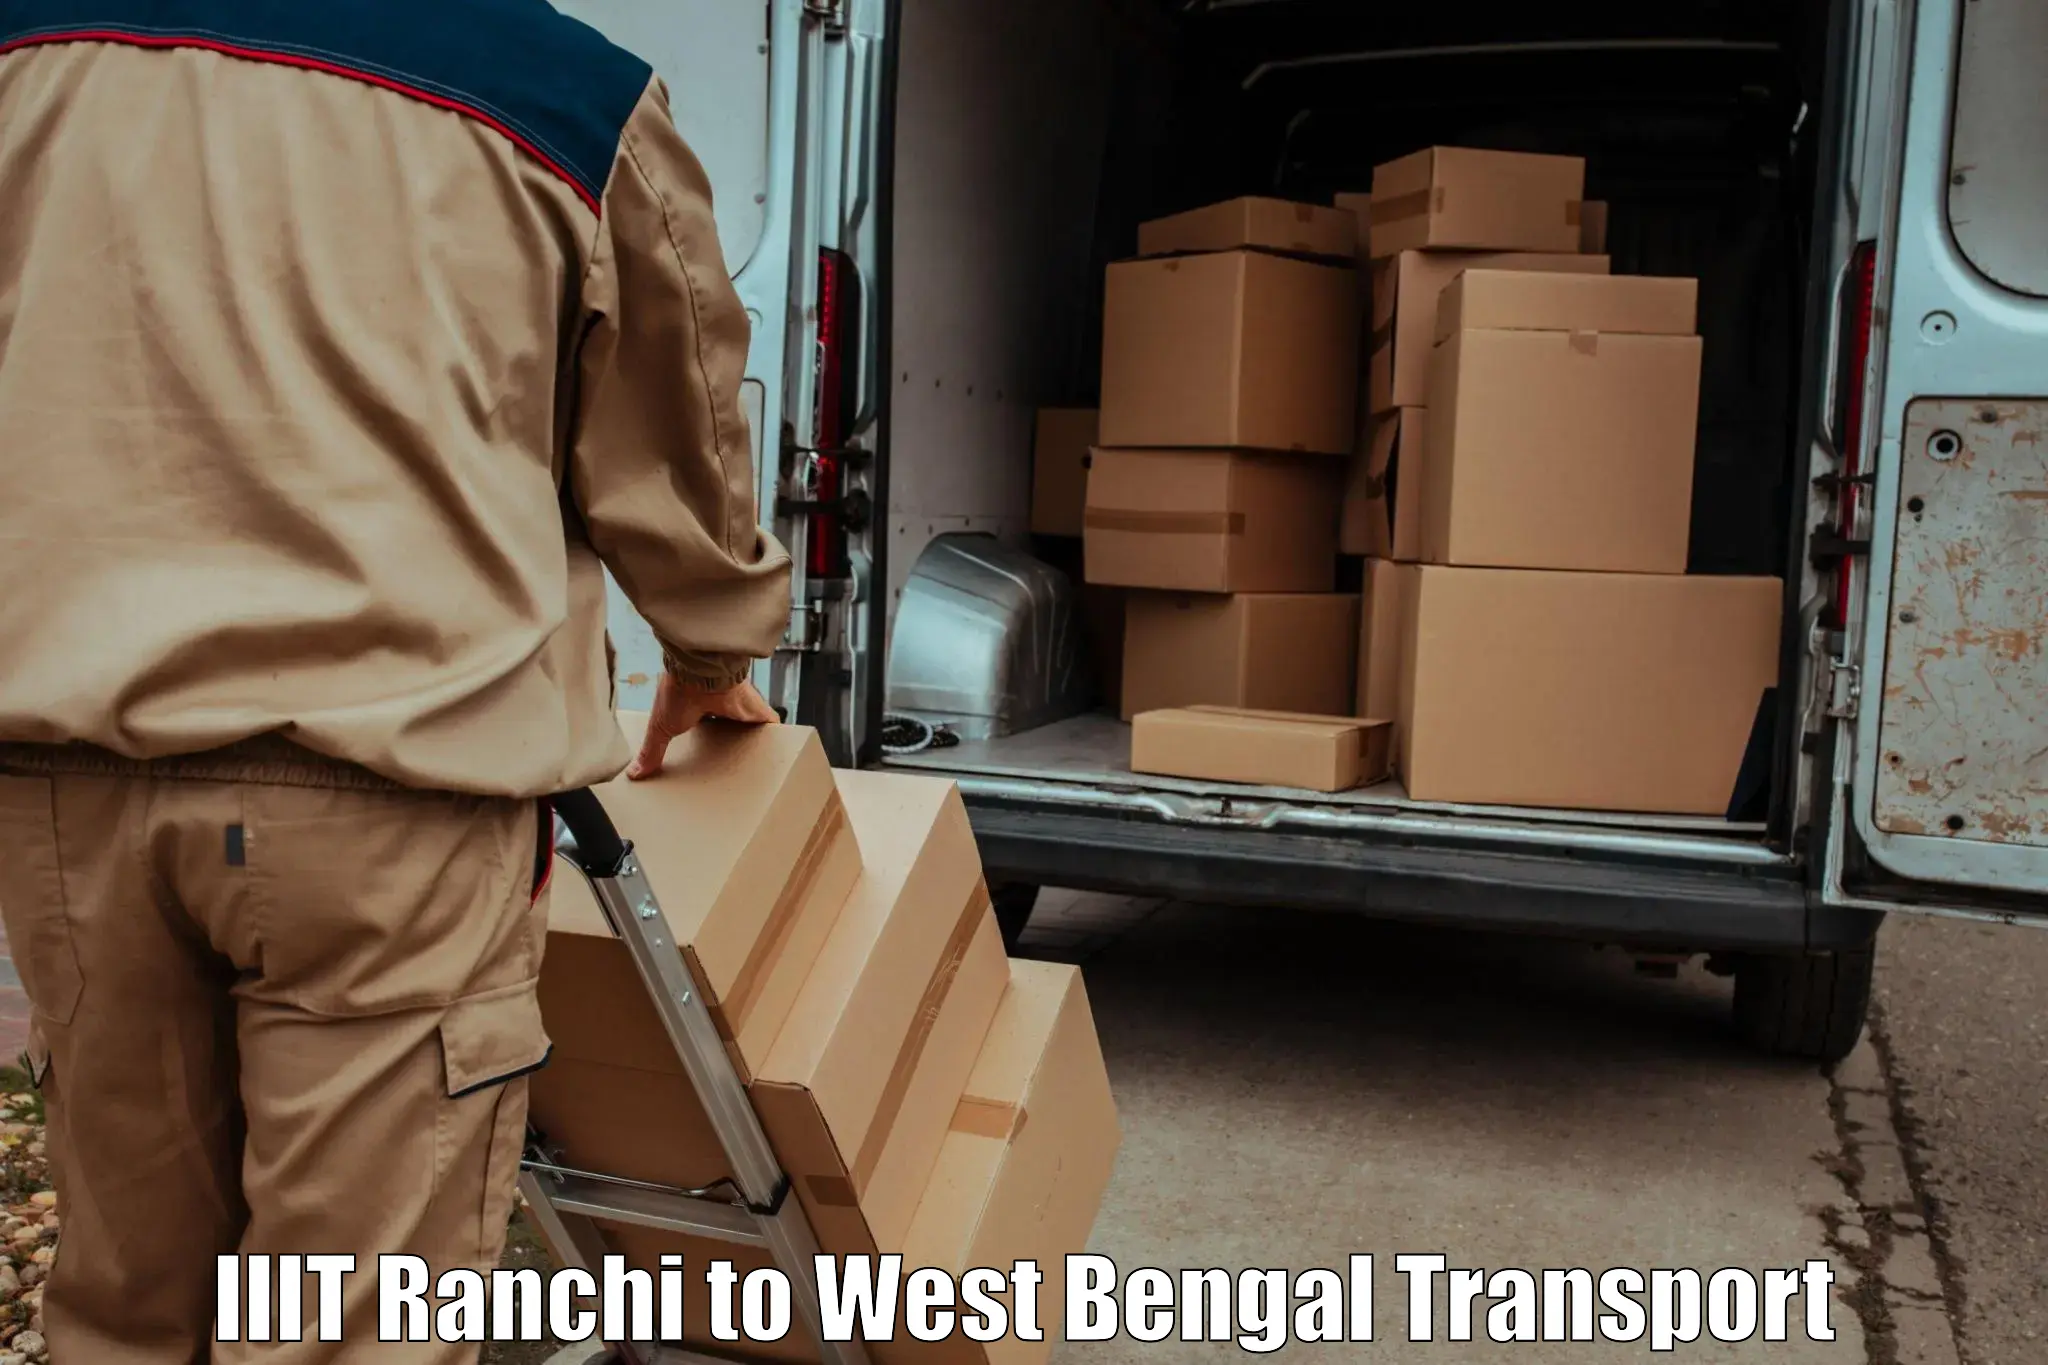 Nearest transport service IIIT Ranchi to Midnapore